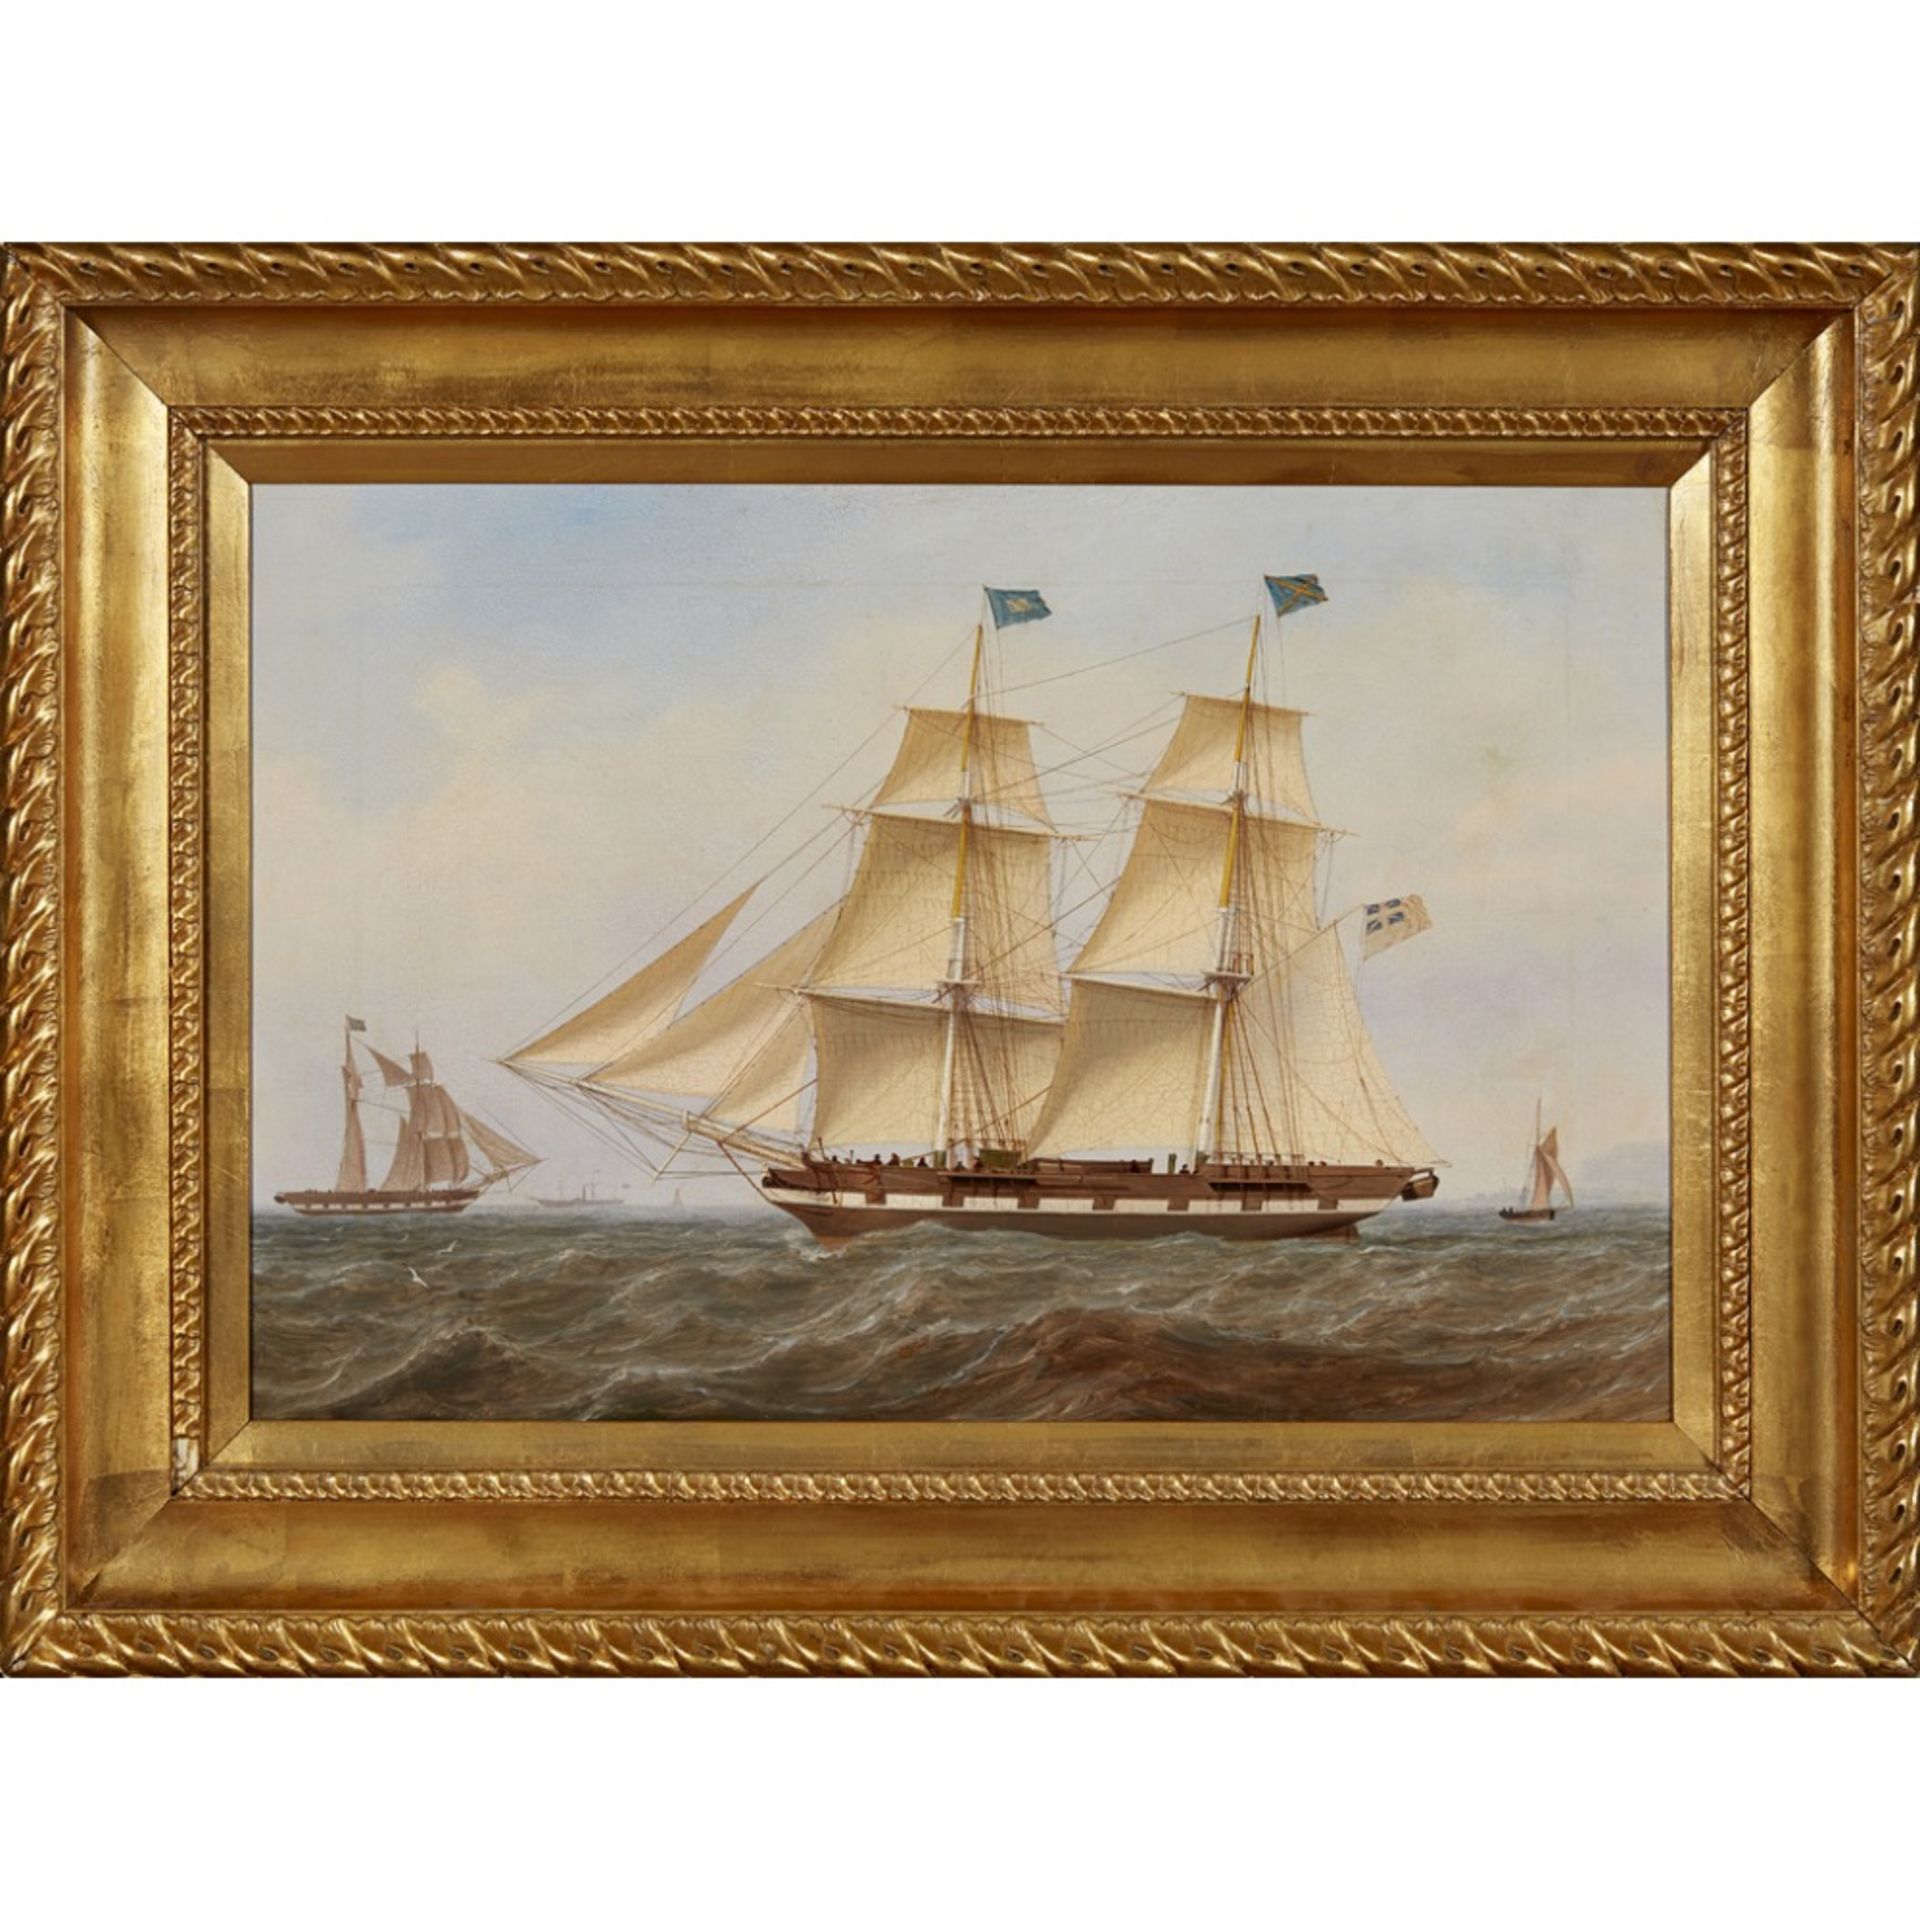 WILLIAM CLARK OF GREENOCK (SCOTTISH 1803-1883)SHIPPING IN CALM SEAS Signed and dated 1859, oil on - Image 2 of 2